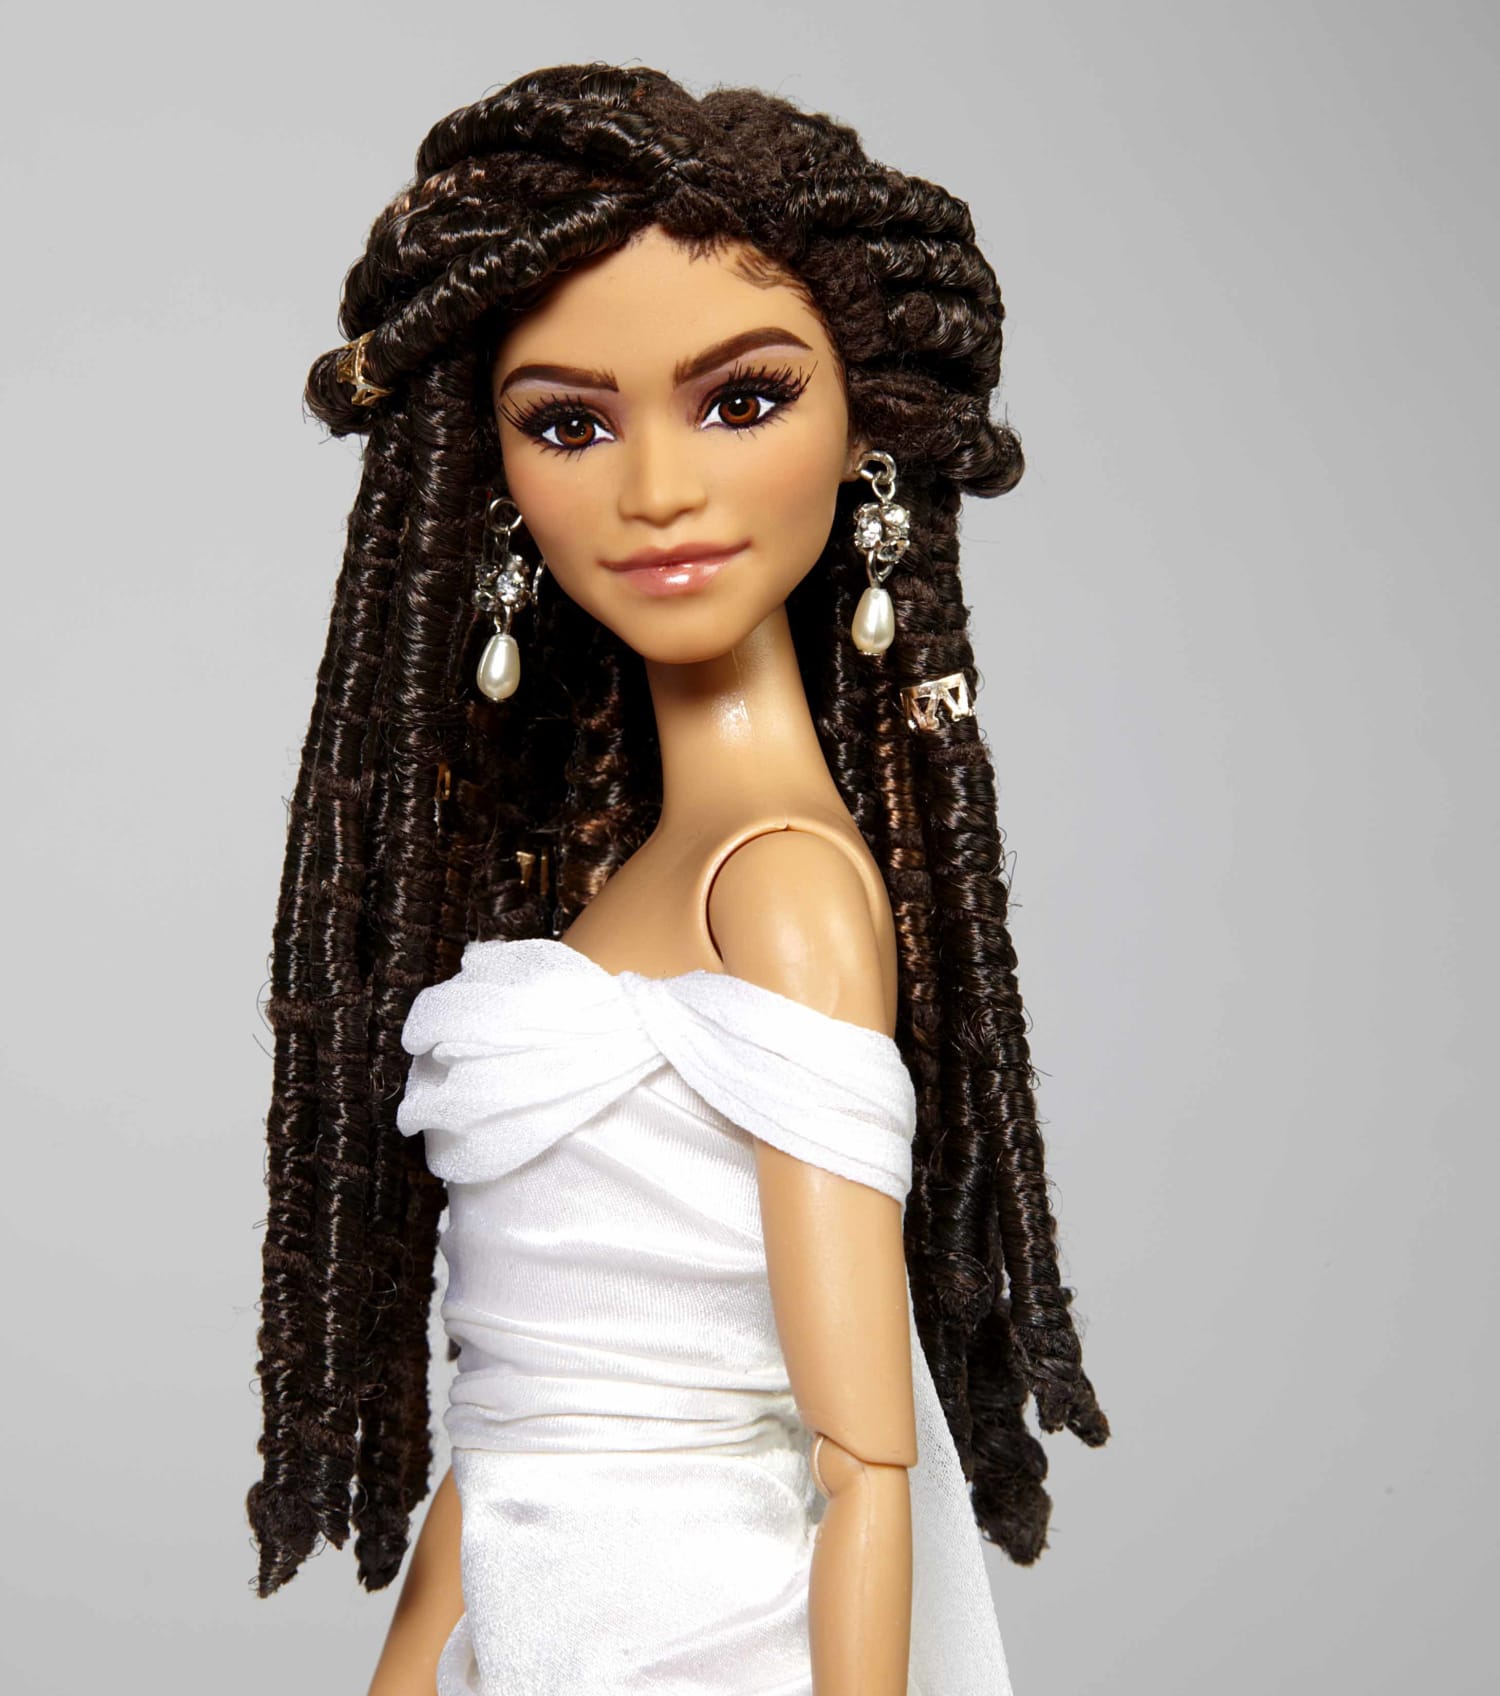 Barbie Is Presenting Zendaya With Her Own Doll And It's Freakin